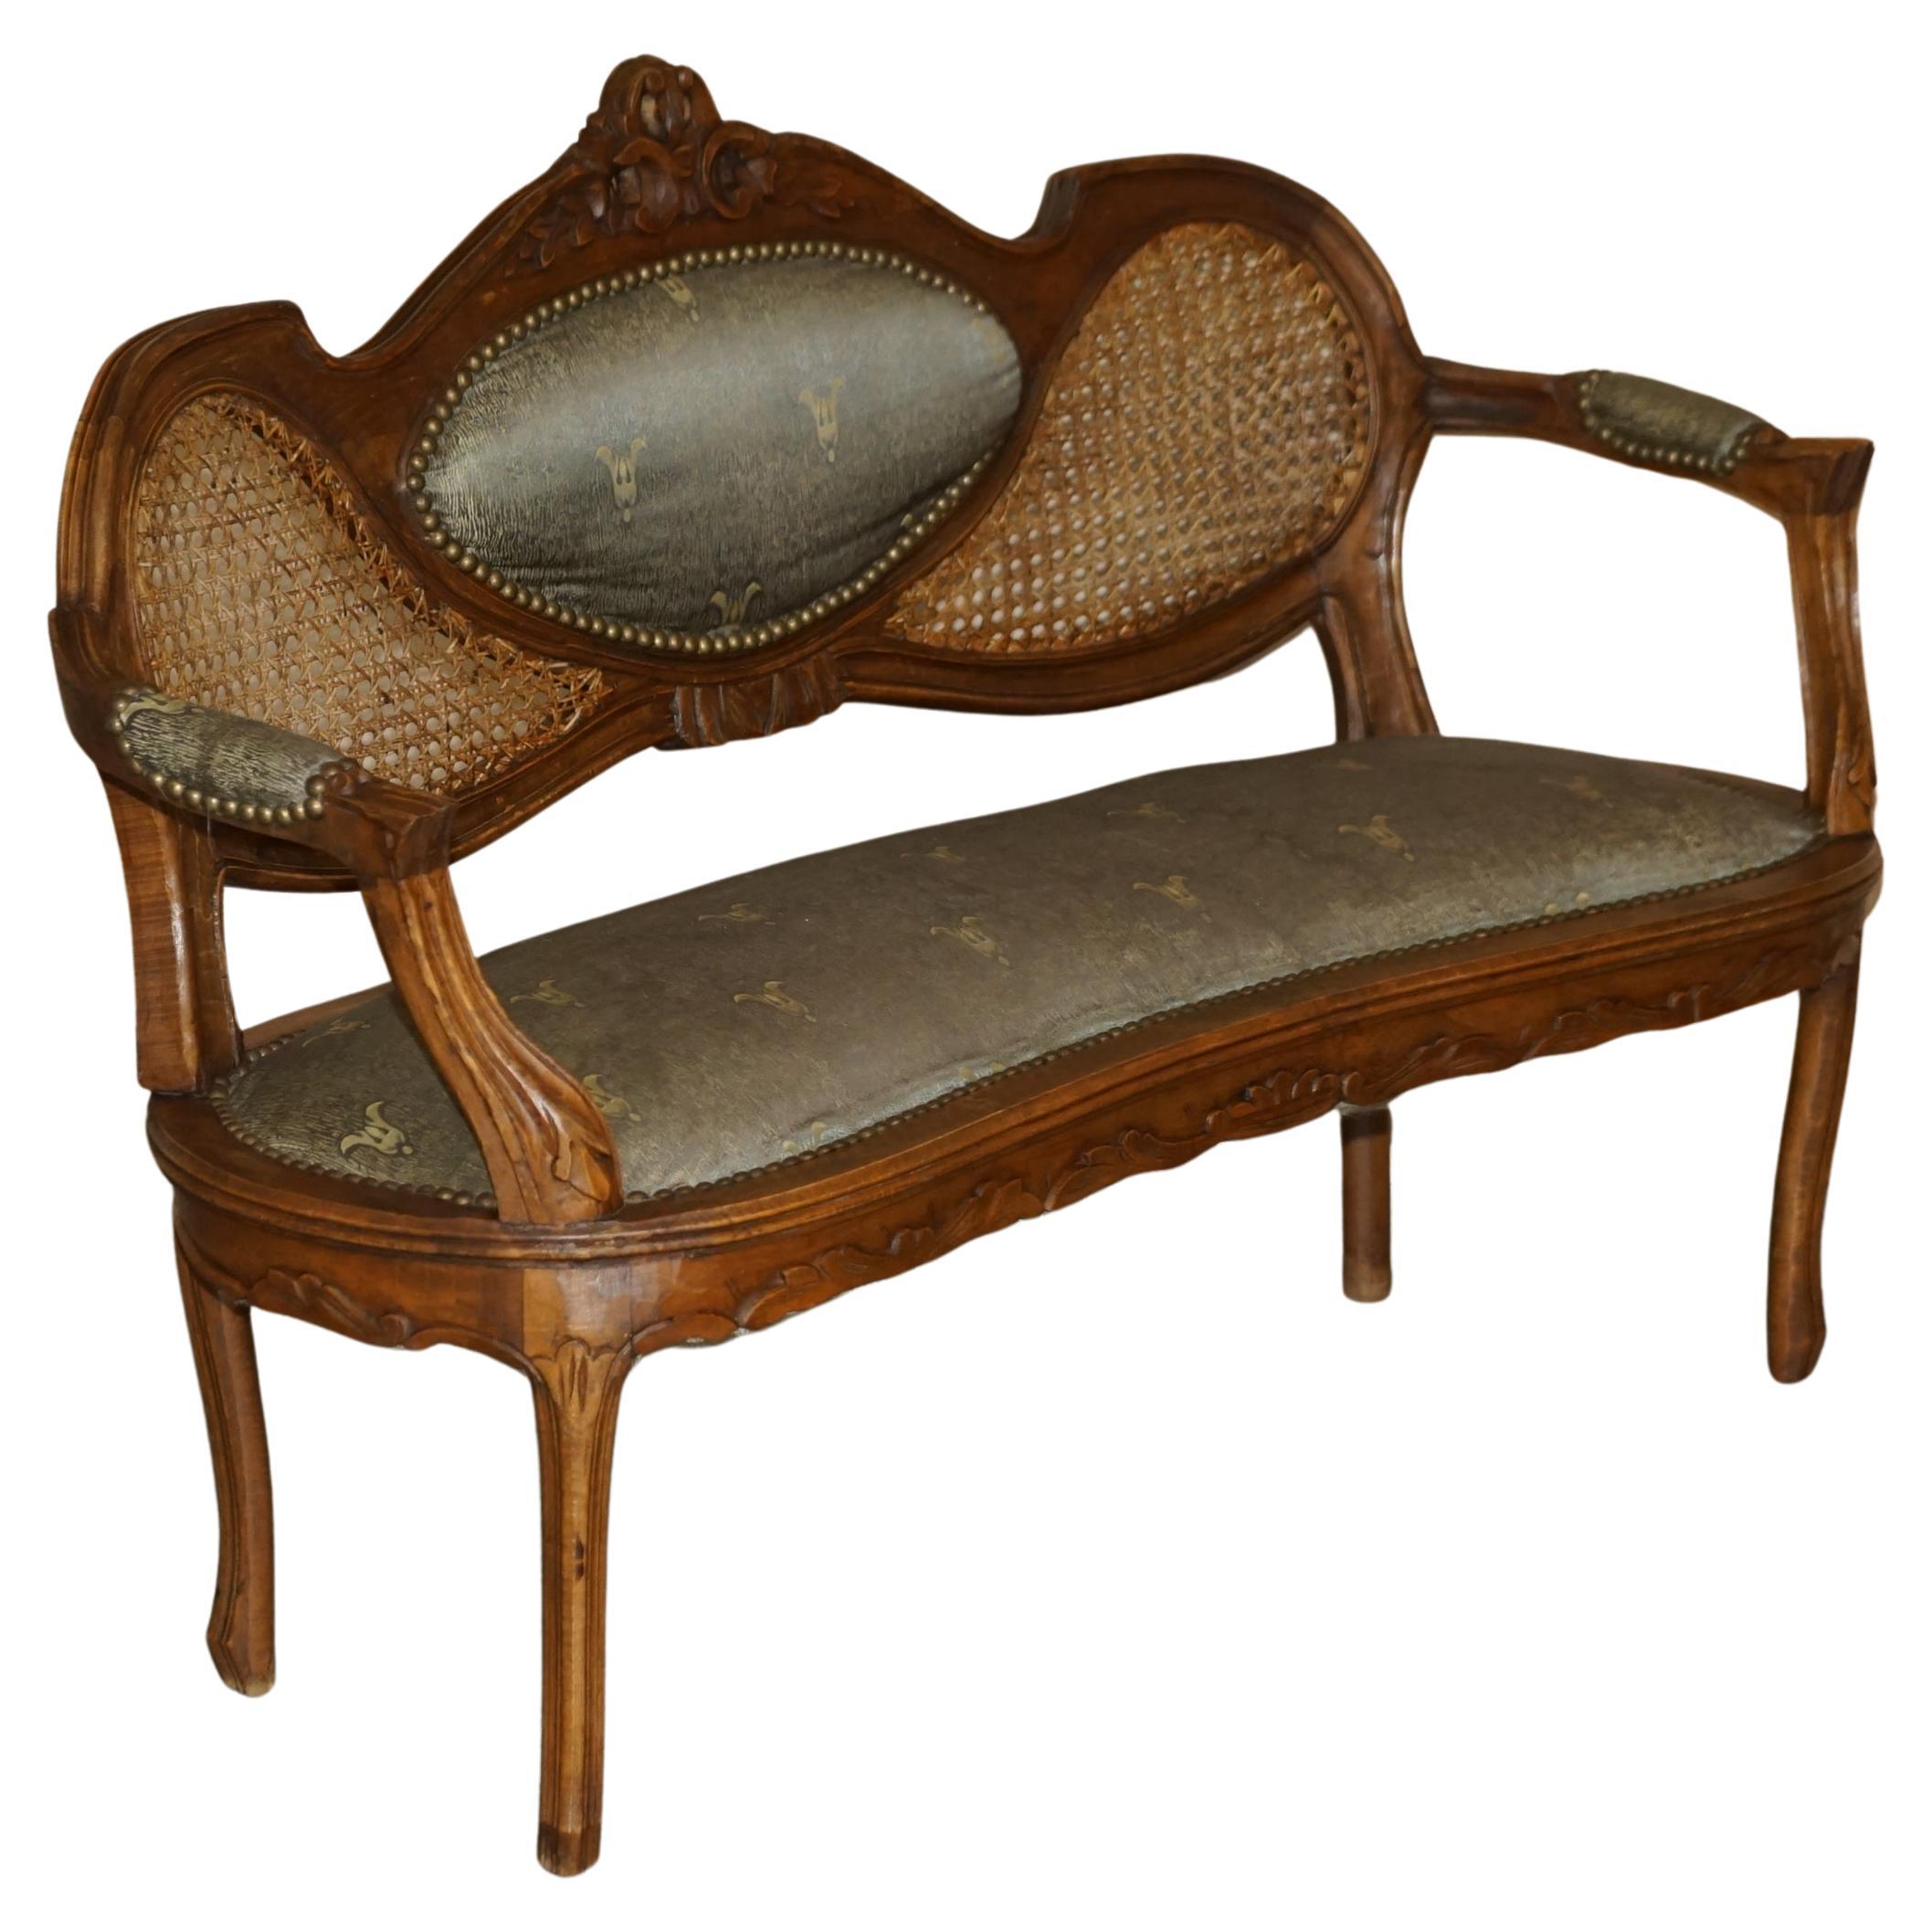 LOVELY ANTIQUE NAPOLEON III CIRCA 1890 BERGERE WiNDOW SEAT BENCH SETTEE SOFA For Sale